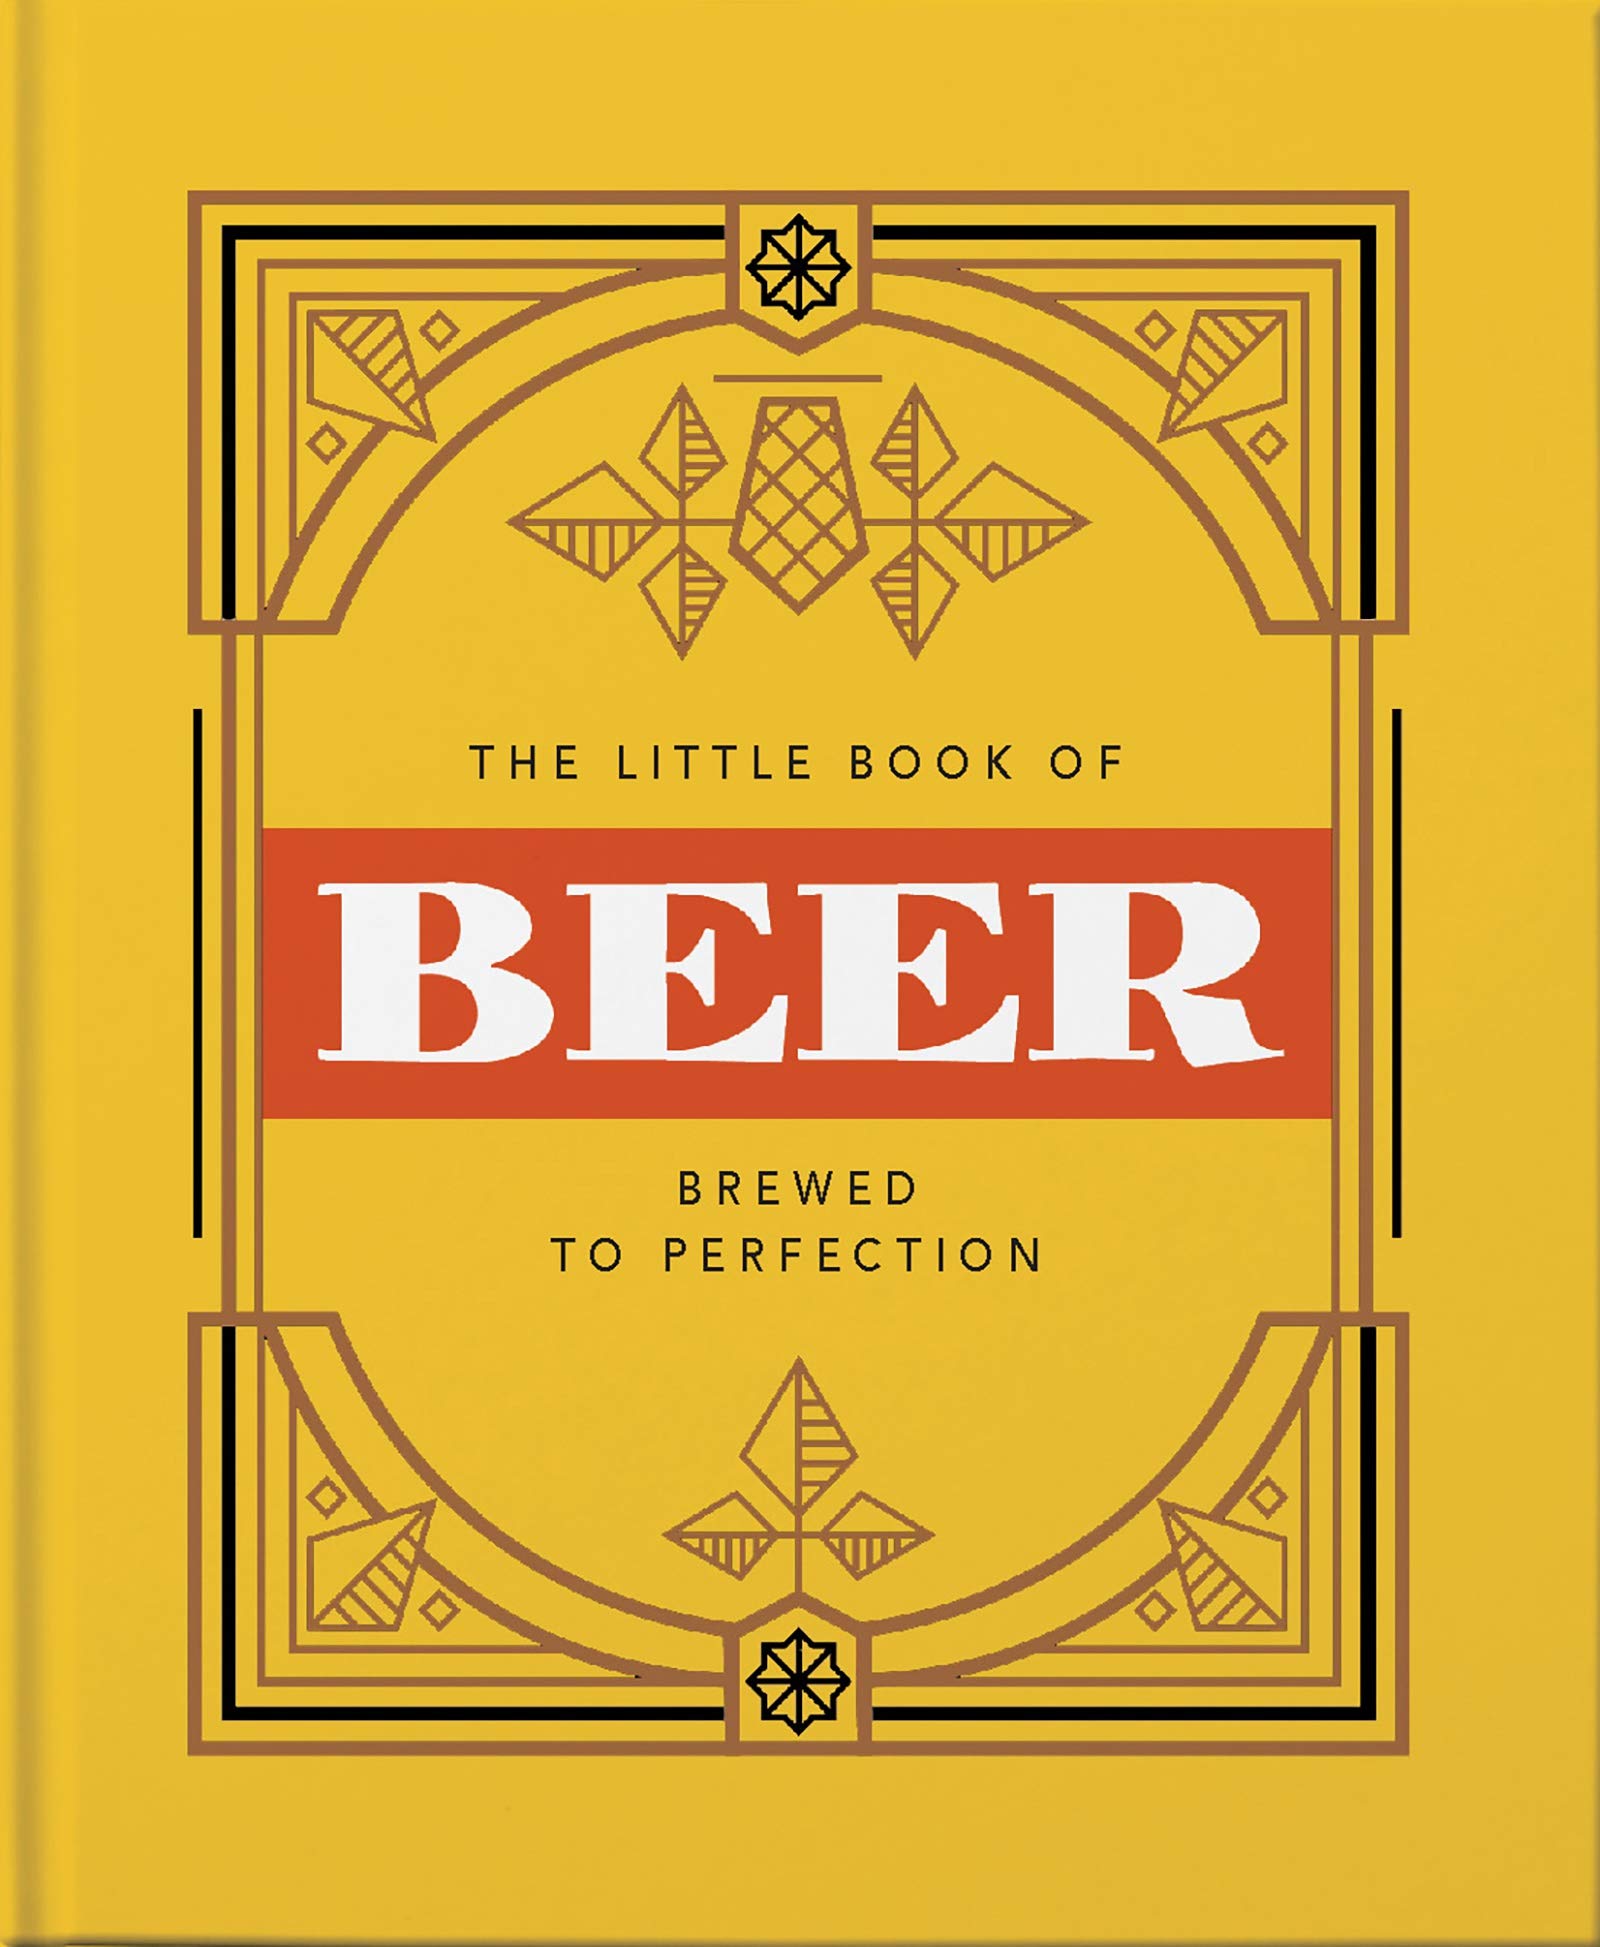 THE LITTLE BOOK OF BEER: BREWED TO PERFECTION / ORANGE HIPPO! | Orange Hippo!